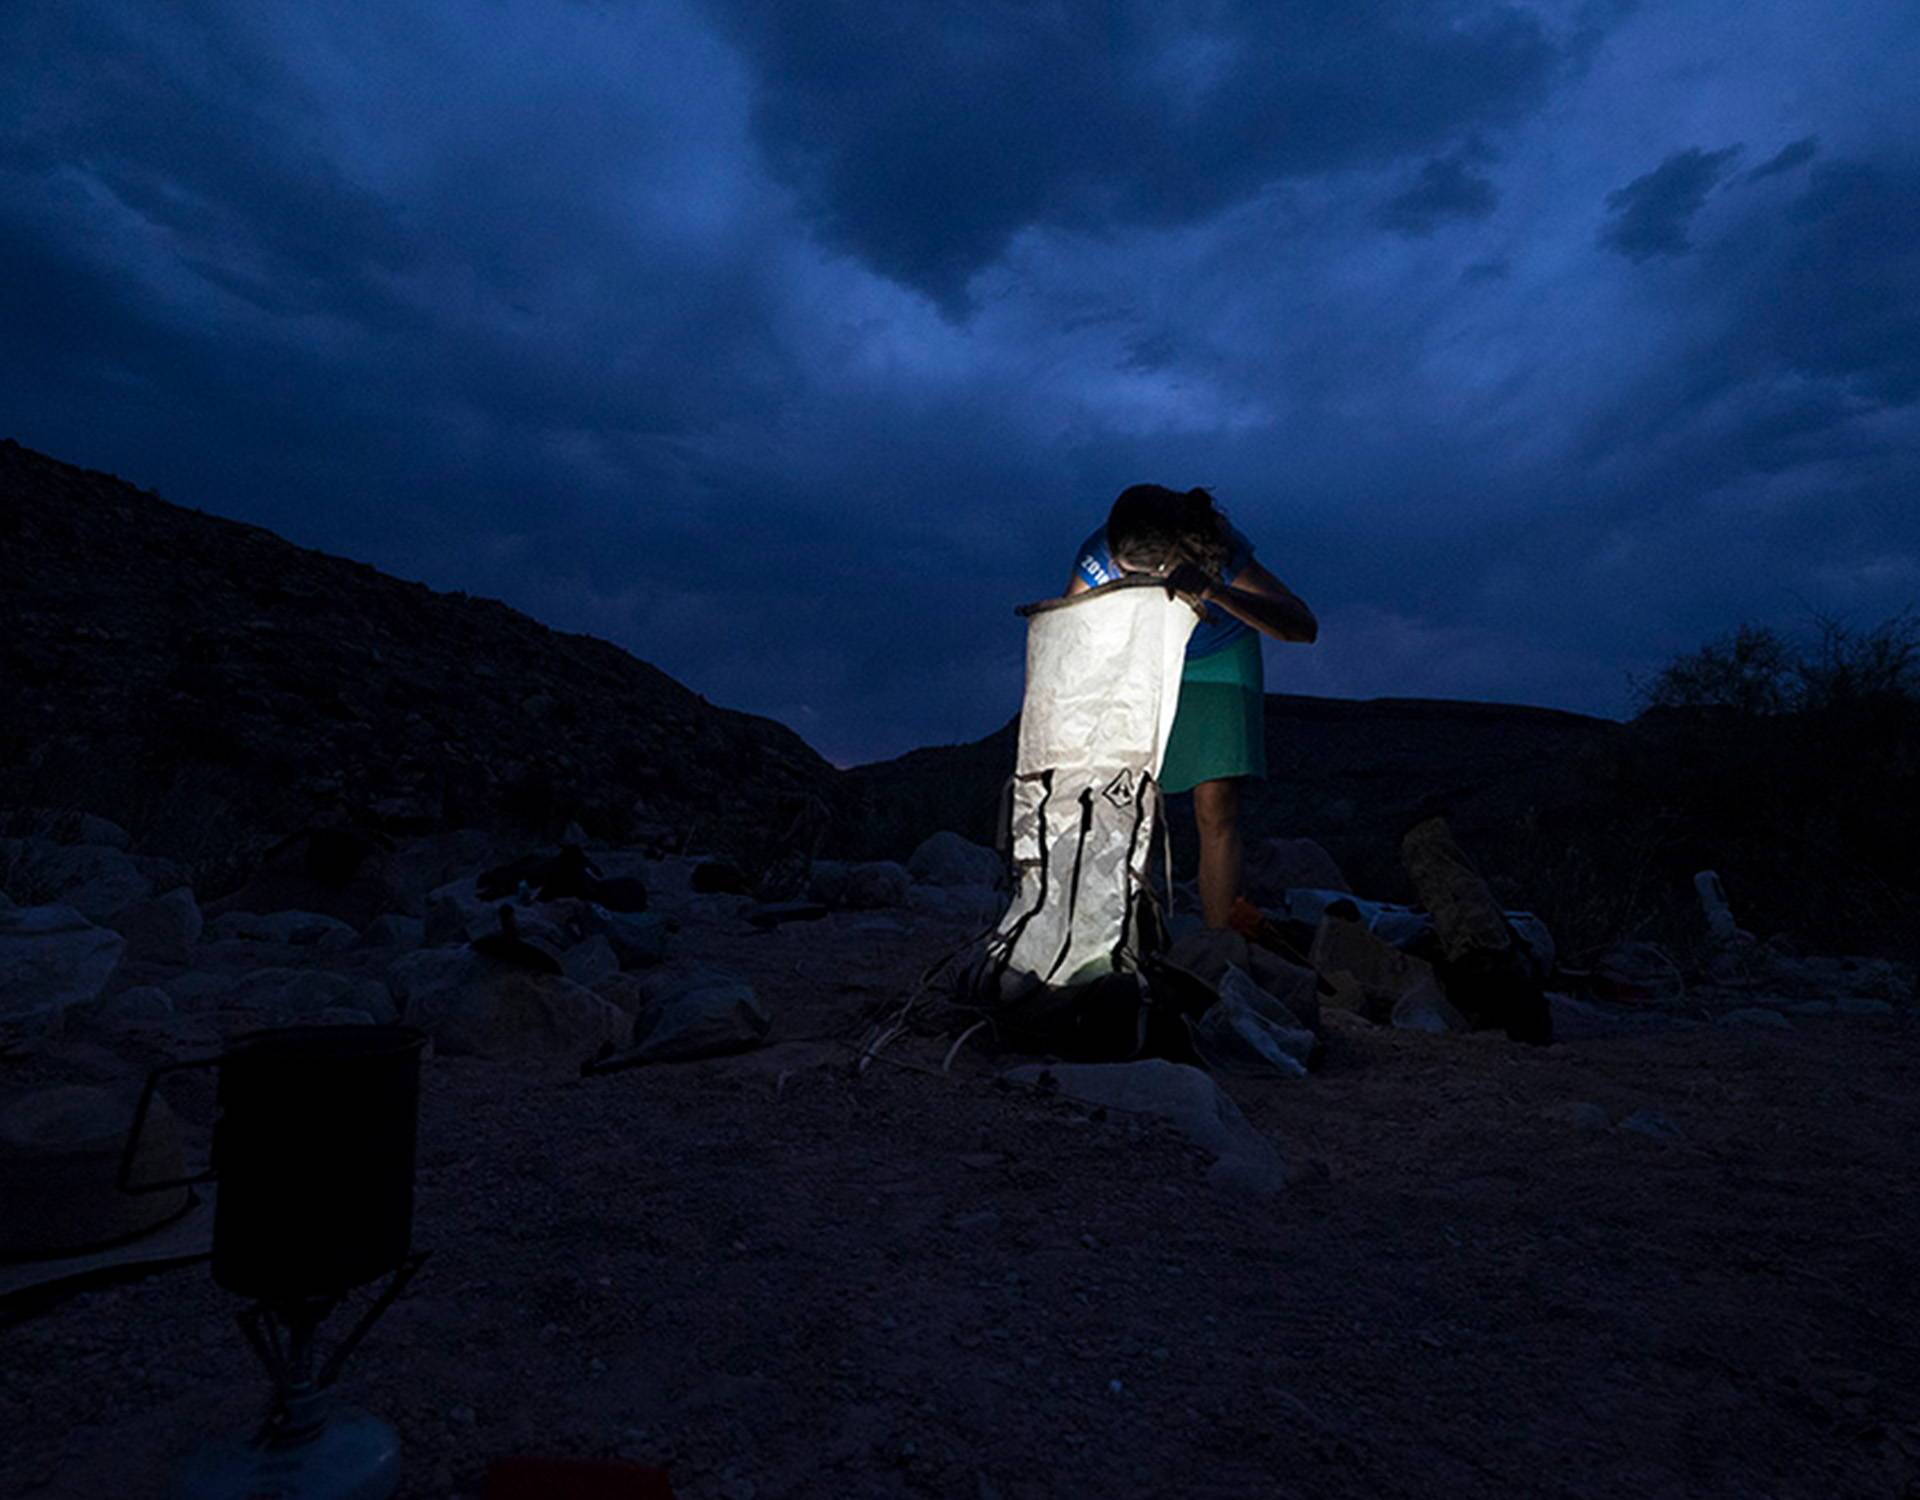 A woman is standing in the desert at night with a flashlight.